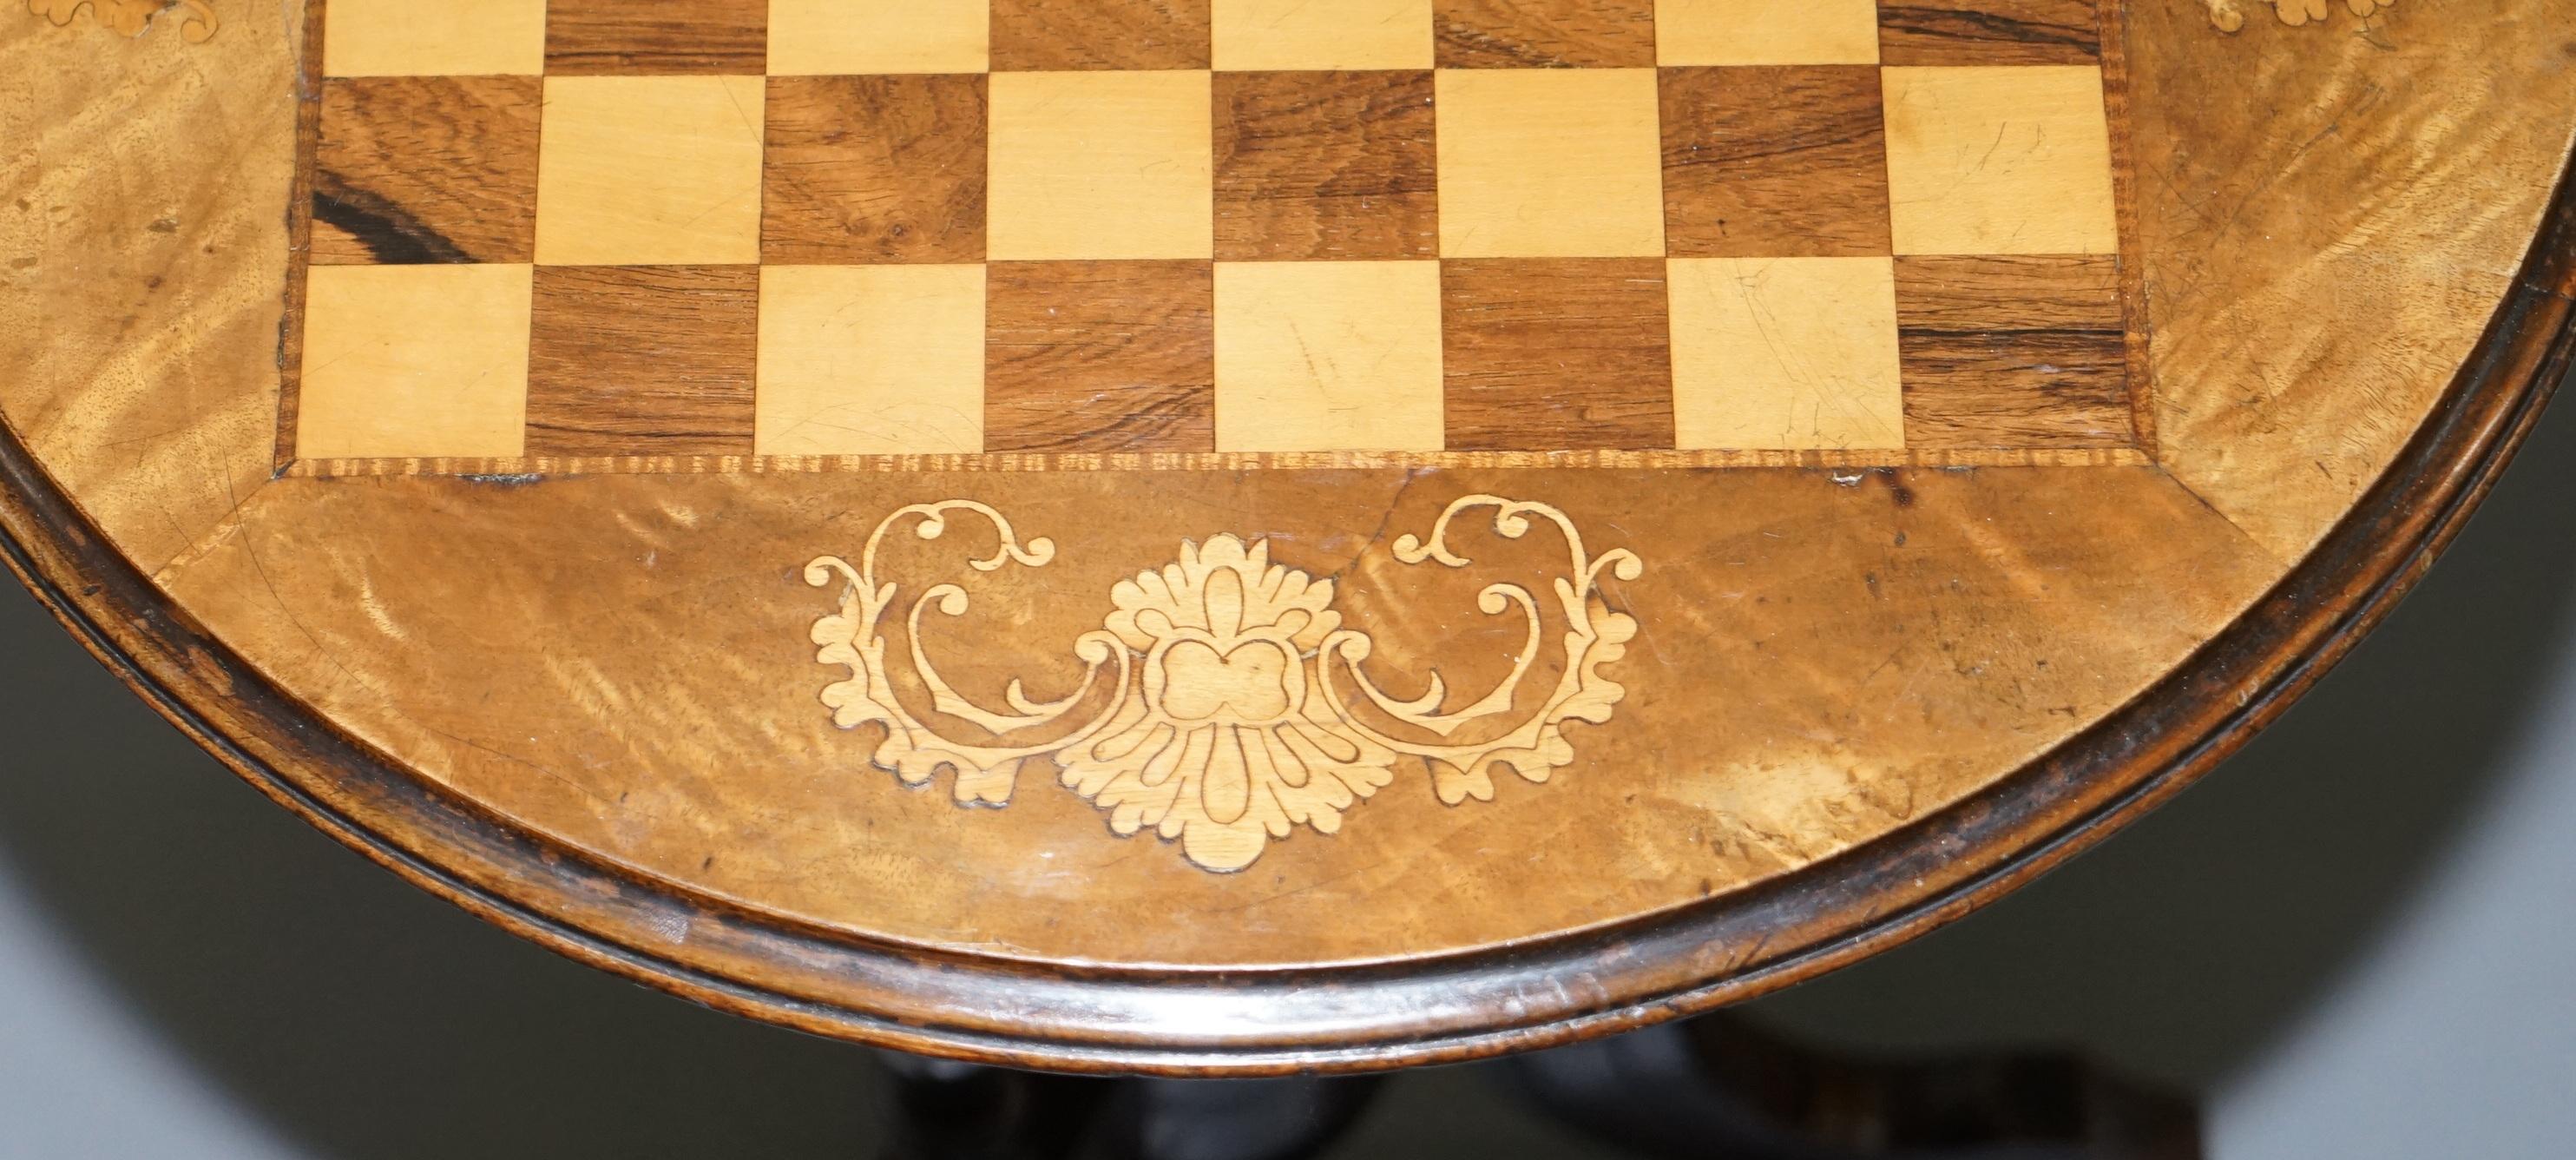 Late 19th Century Victorian 1880 Walnut & Boxwood Marquetry Inlaid Chess Games Table Ornate Legs